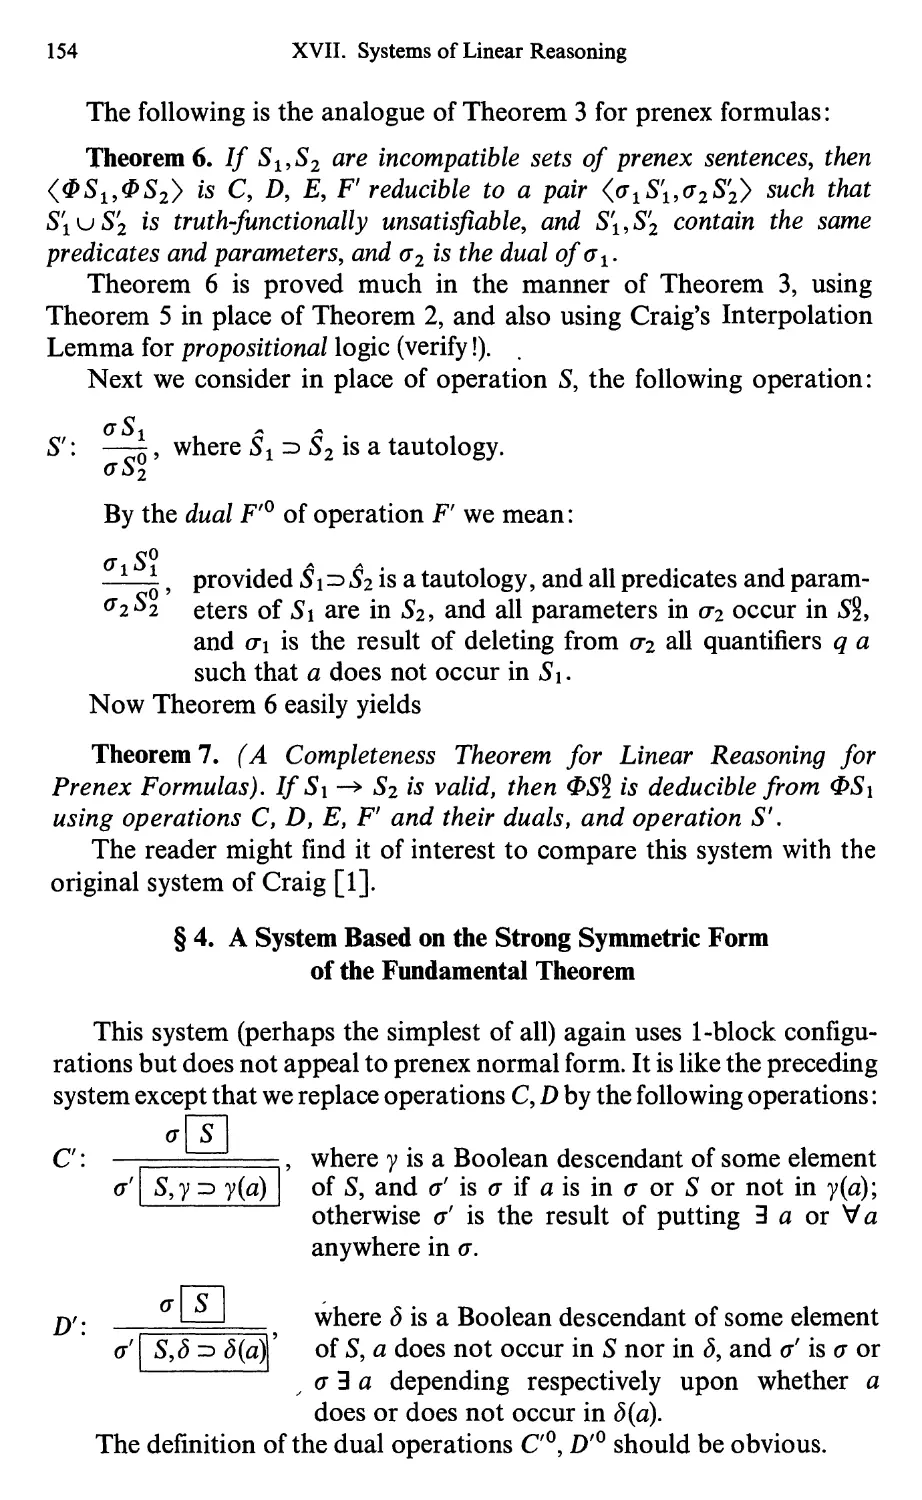 17.4 A System Based on the Strong Symmetric Form of the Fundamental Theorem